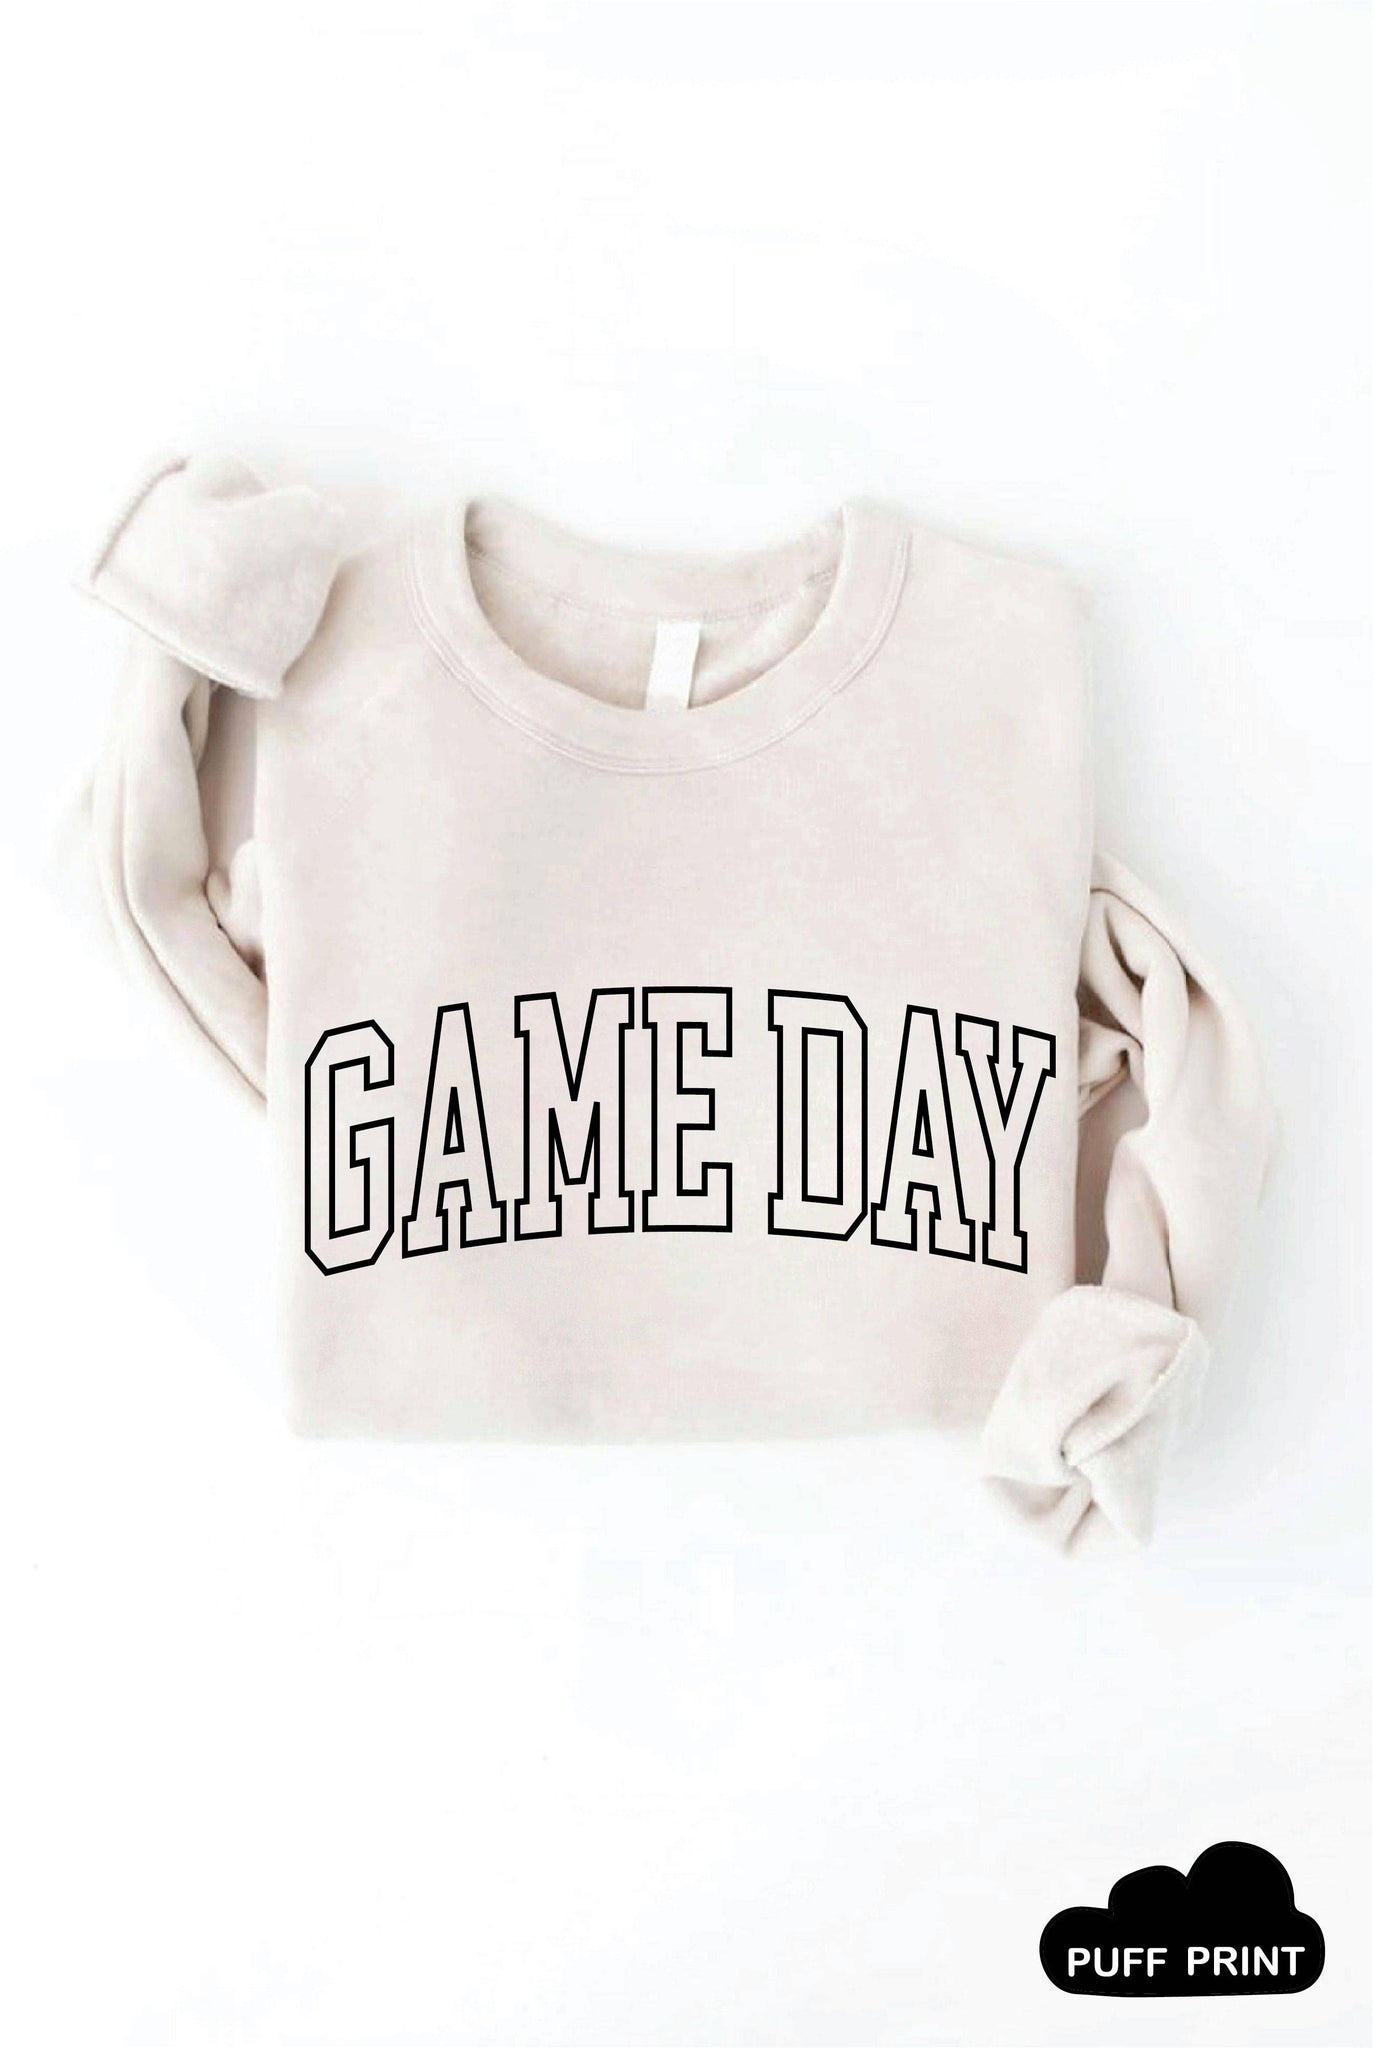 GAME DAY PUFF PRINT GRAPHIC SWEATSHIRT IN HEATHER DUST-Graphic Sweatshirt-MODE-Couture-Boutique-Womens-Clothing